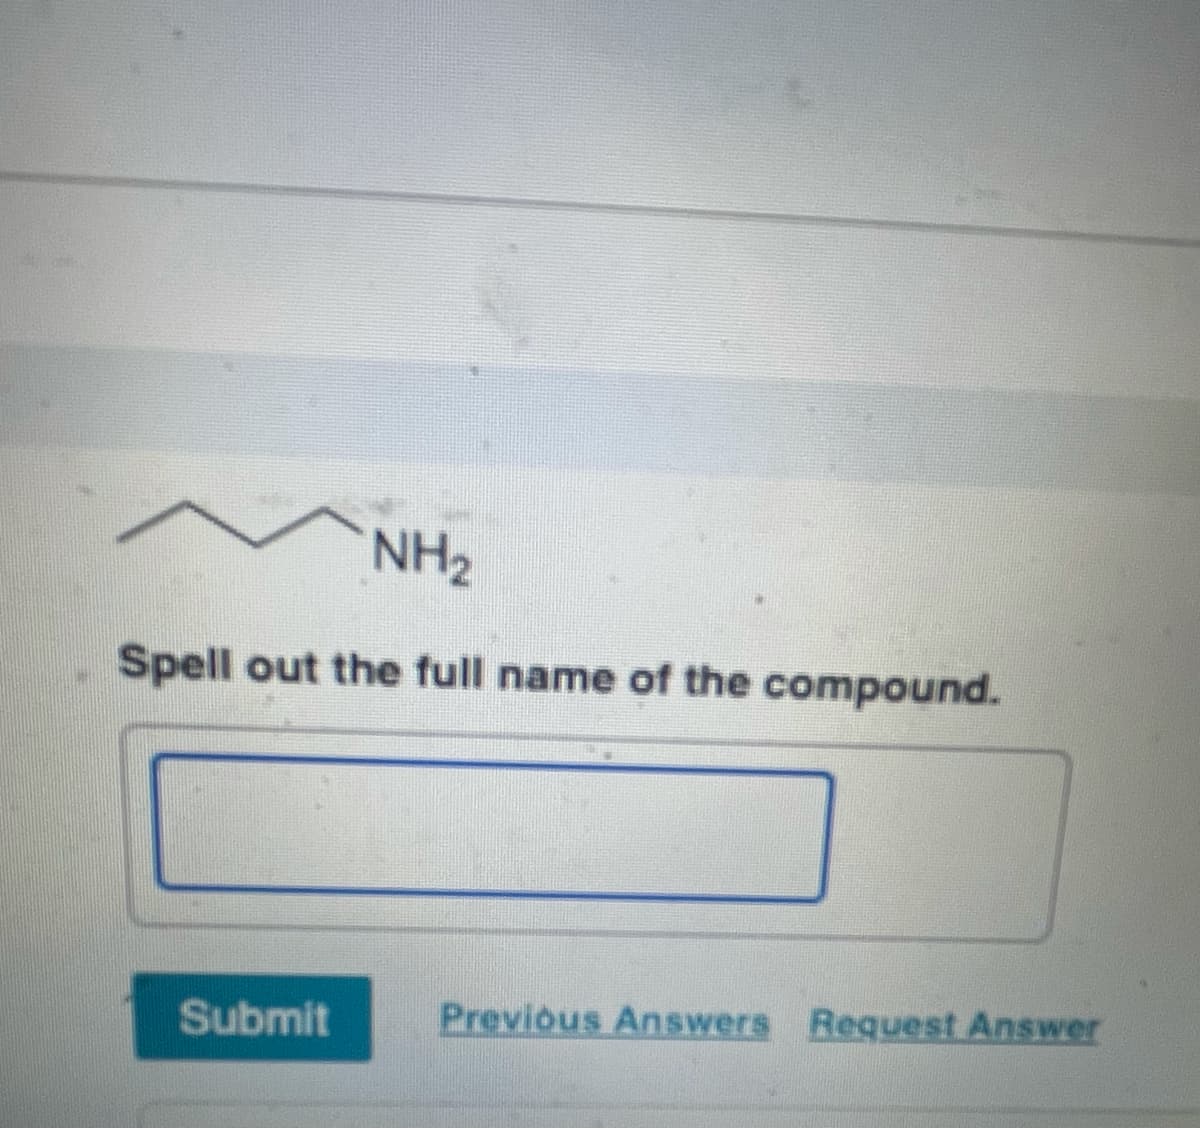 NH2
Spell out the full name of the compound.
Submit
Previous Answers Request Answer
